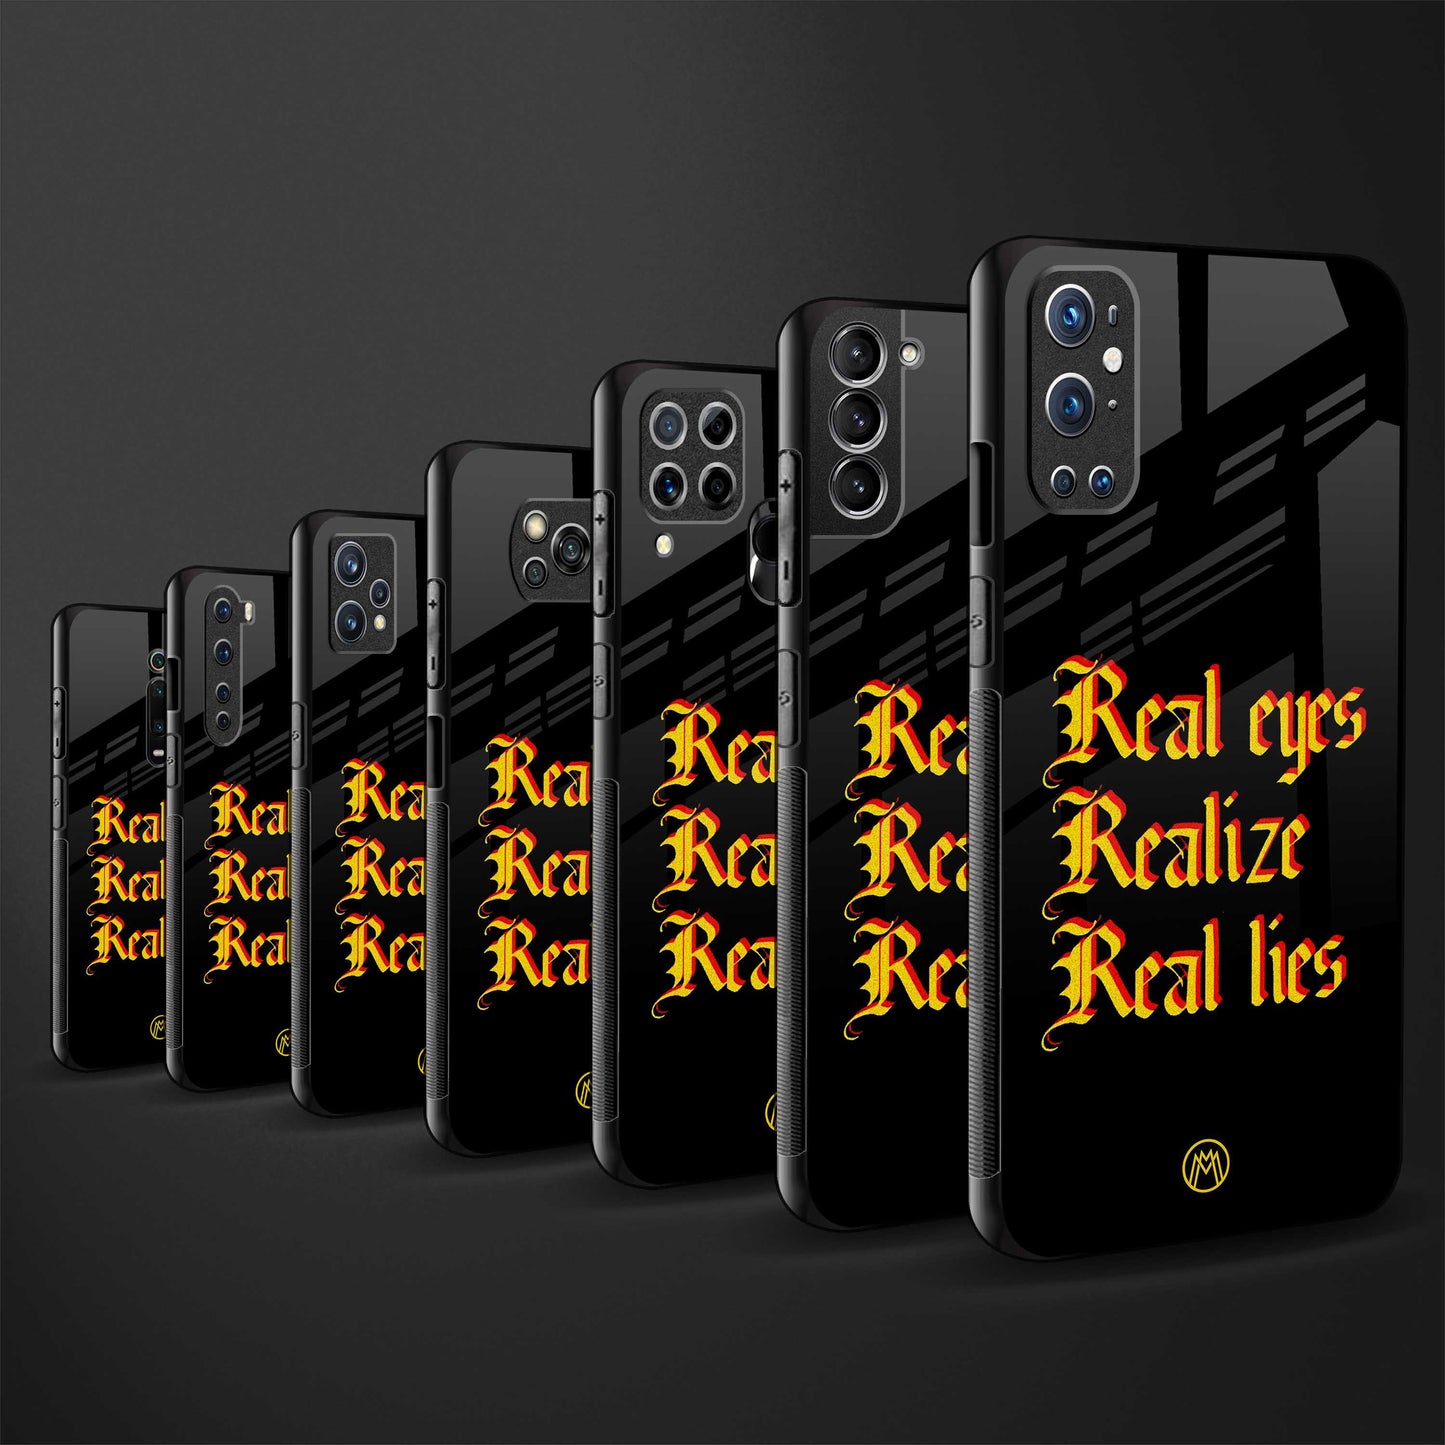 real eyes realize real lies quote glass case for oppo reno 2z image-3